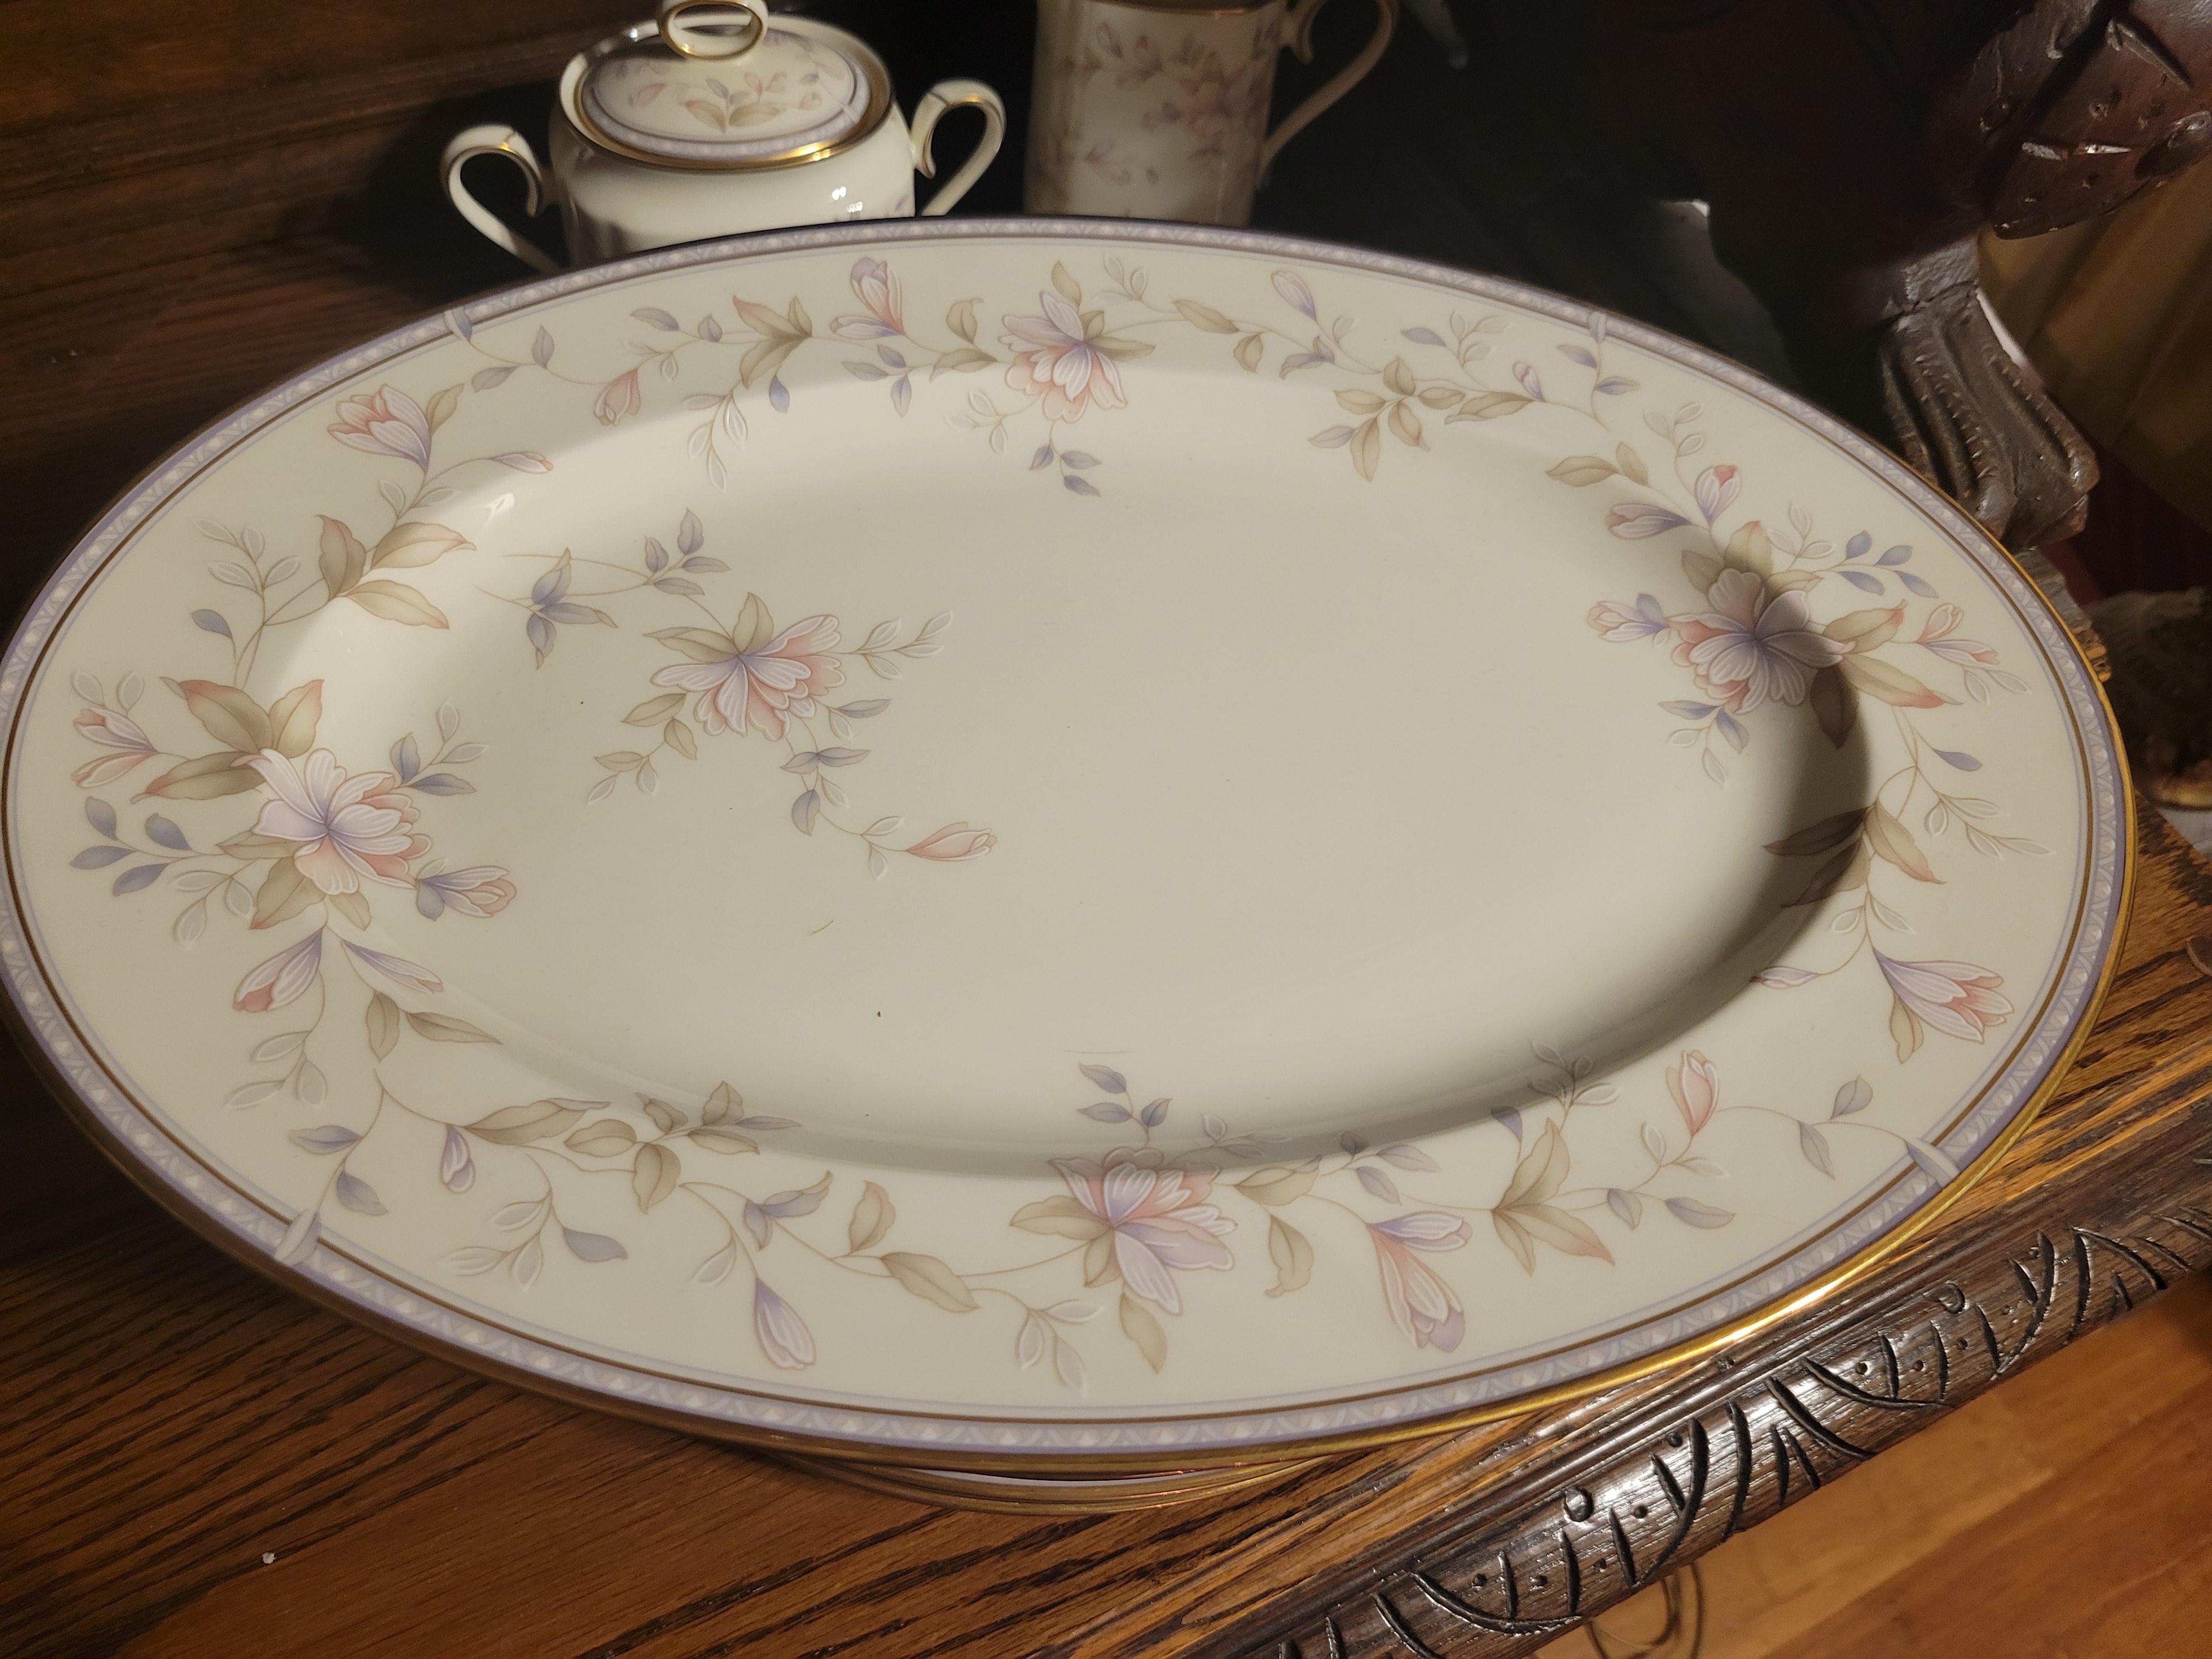 Noritake 'Highland Park' Bone China - 8-Person, 44 Pieces Dining Set For Sale 3